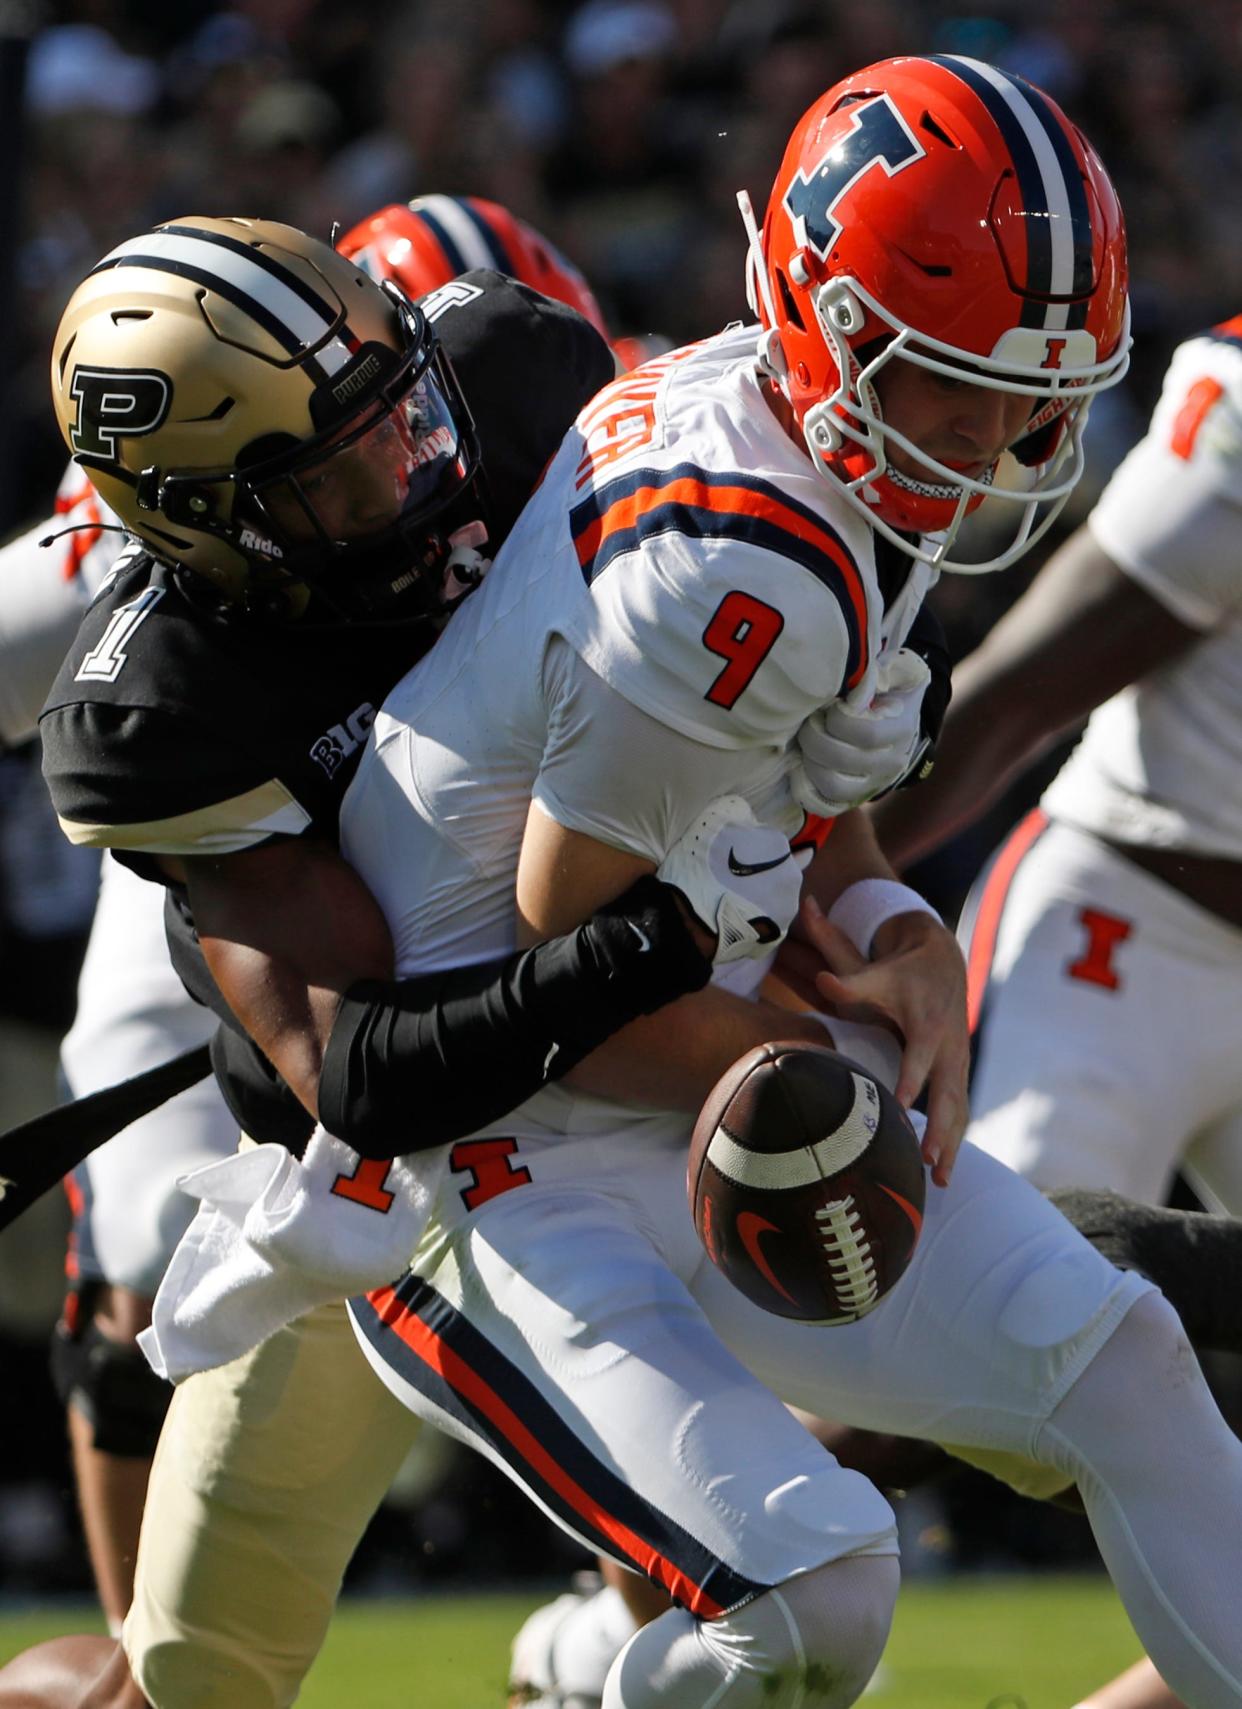 Purdue Boilermakers defensive back Markevious Brown (1) tackles Illinois Fighting Illini quarterback Luke Altmyer (9), forcing a fumble during the NCAA football game, Saturday, Sept. 30, 2023, at Ross-Ade Stadium in West Lafayette, Ind. Purdue Boilermakers won 44-19.